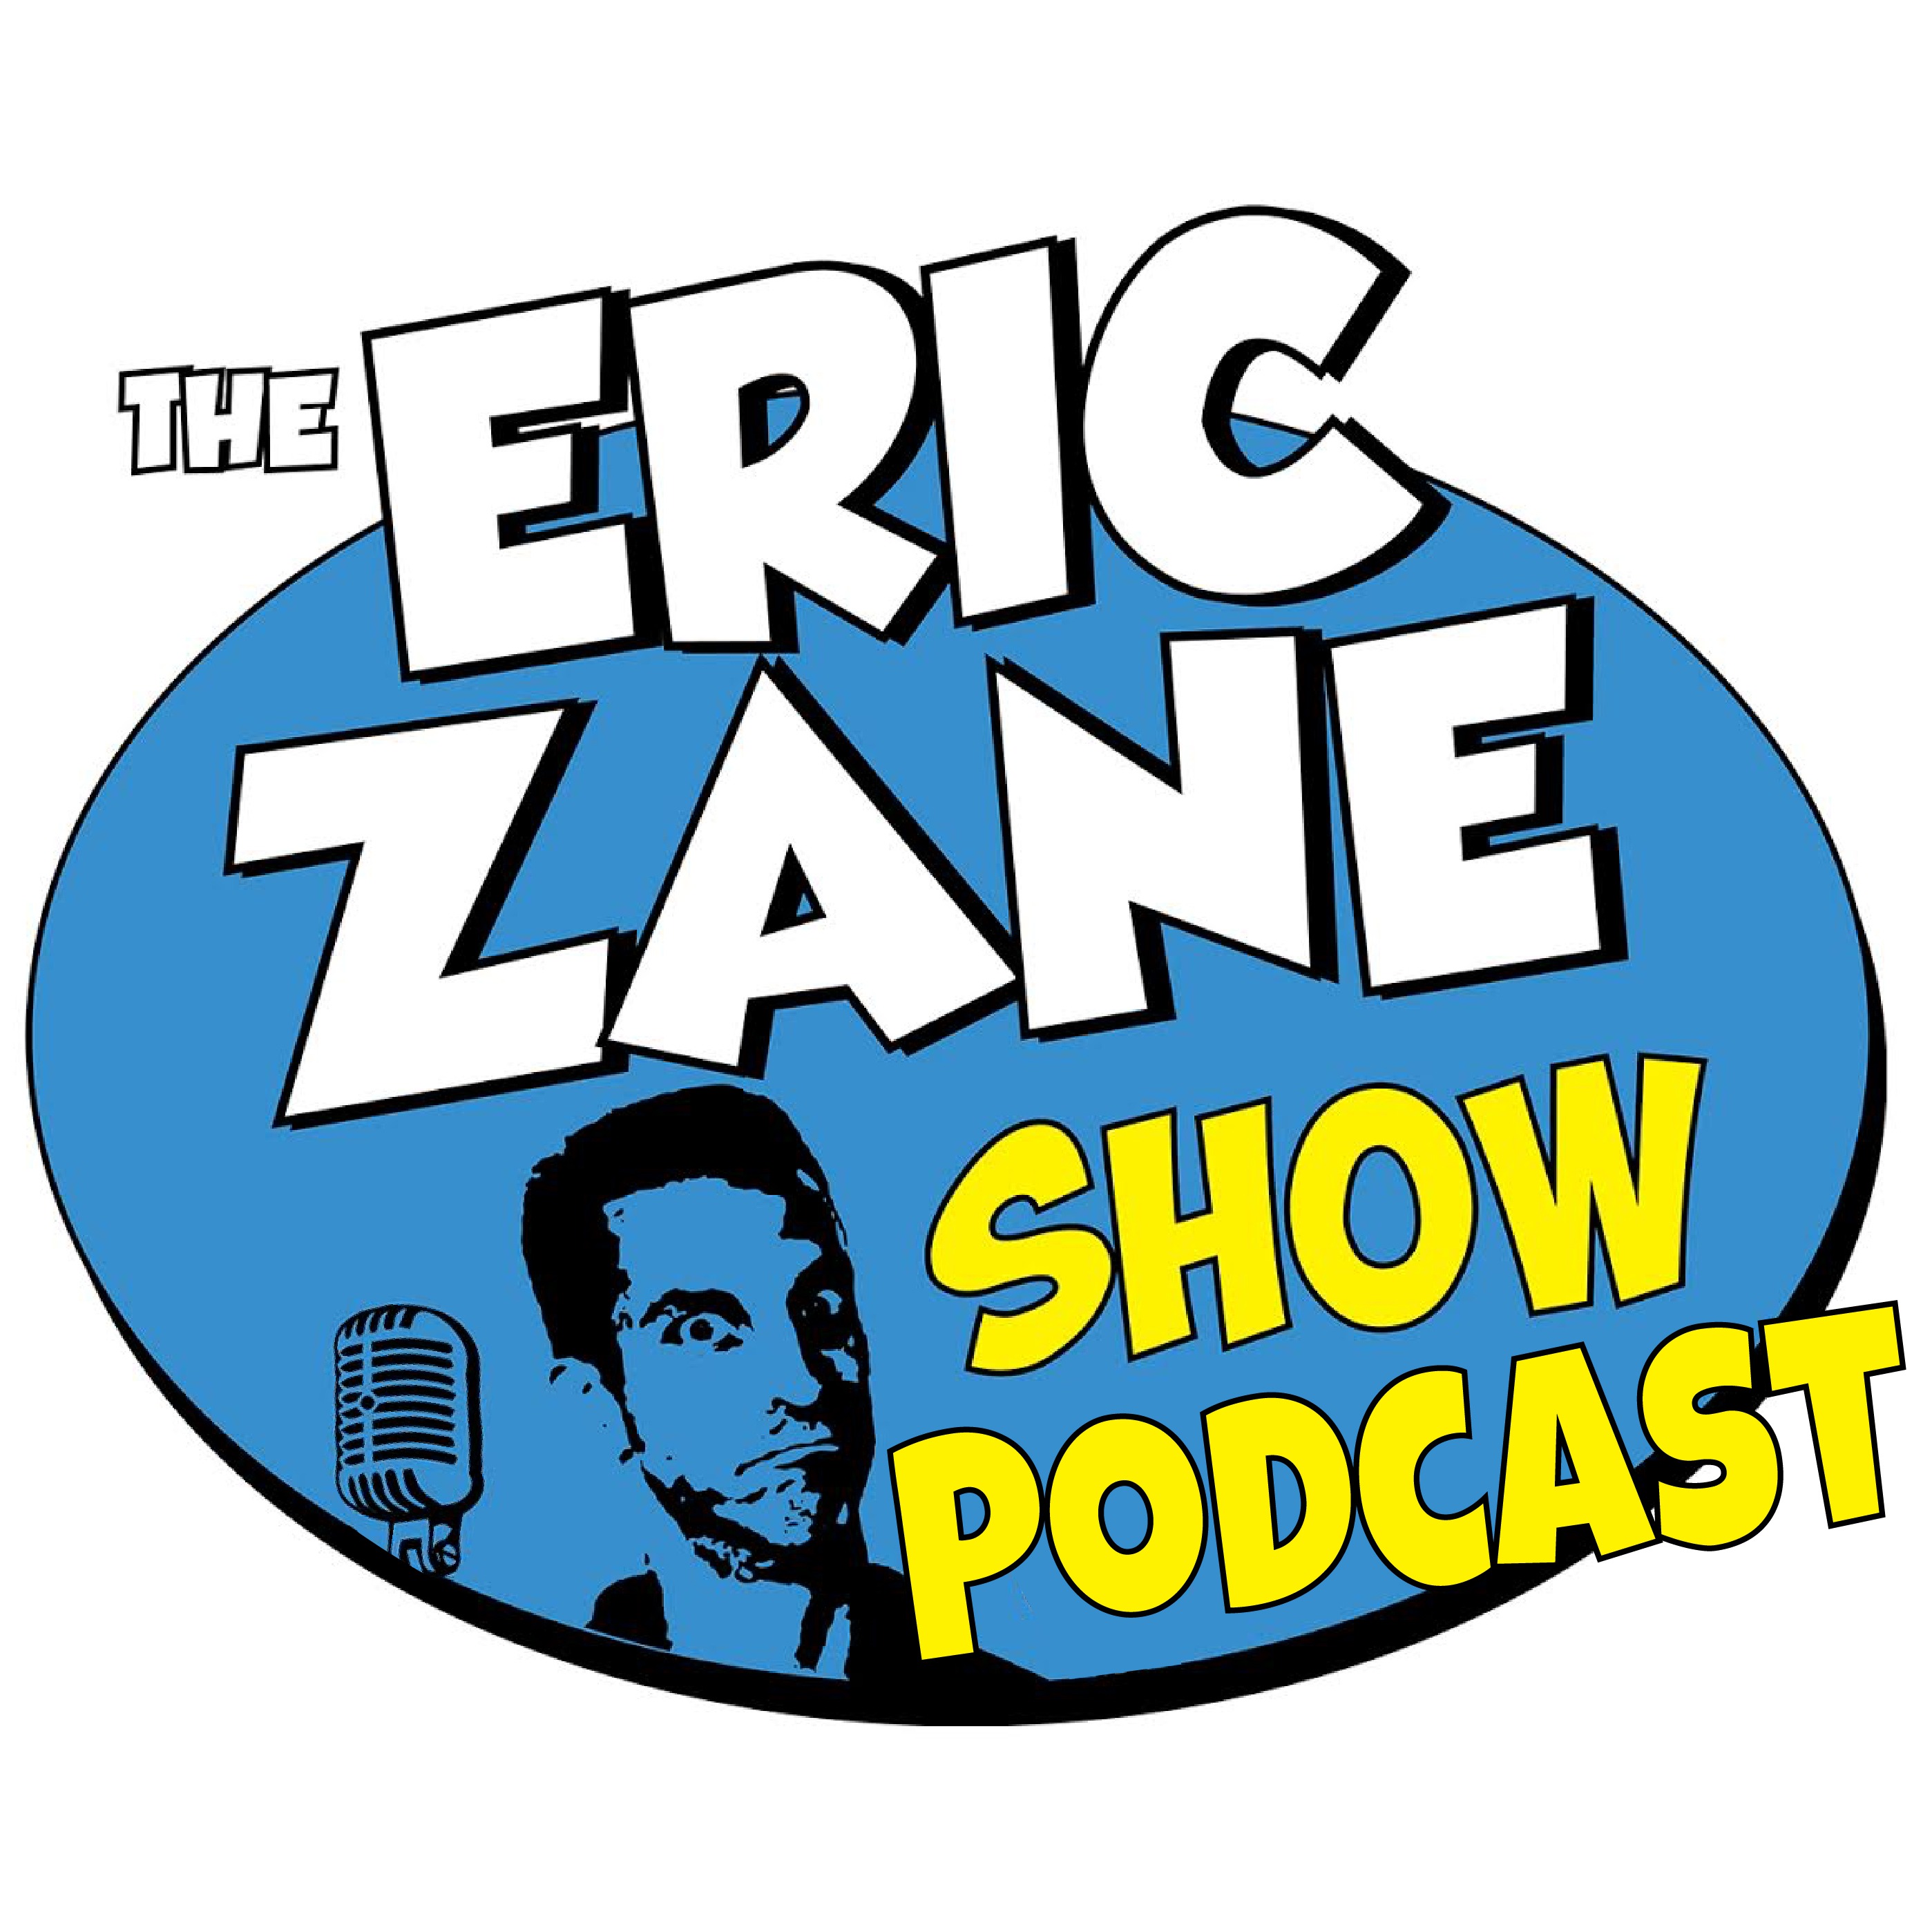 Eric Zane Show Podcast 937 - Bad day for 3 flags on pickup truck guy.